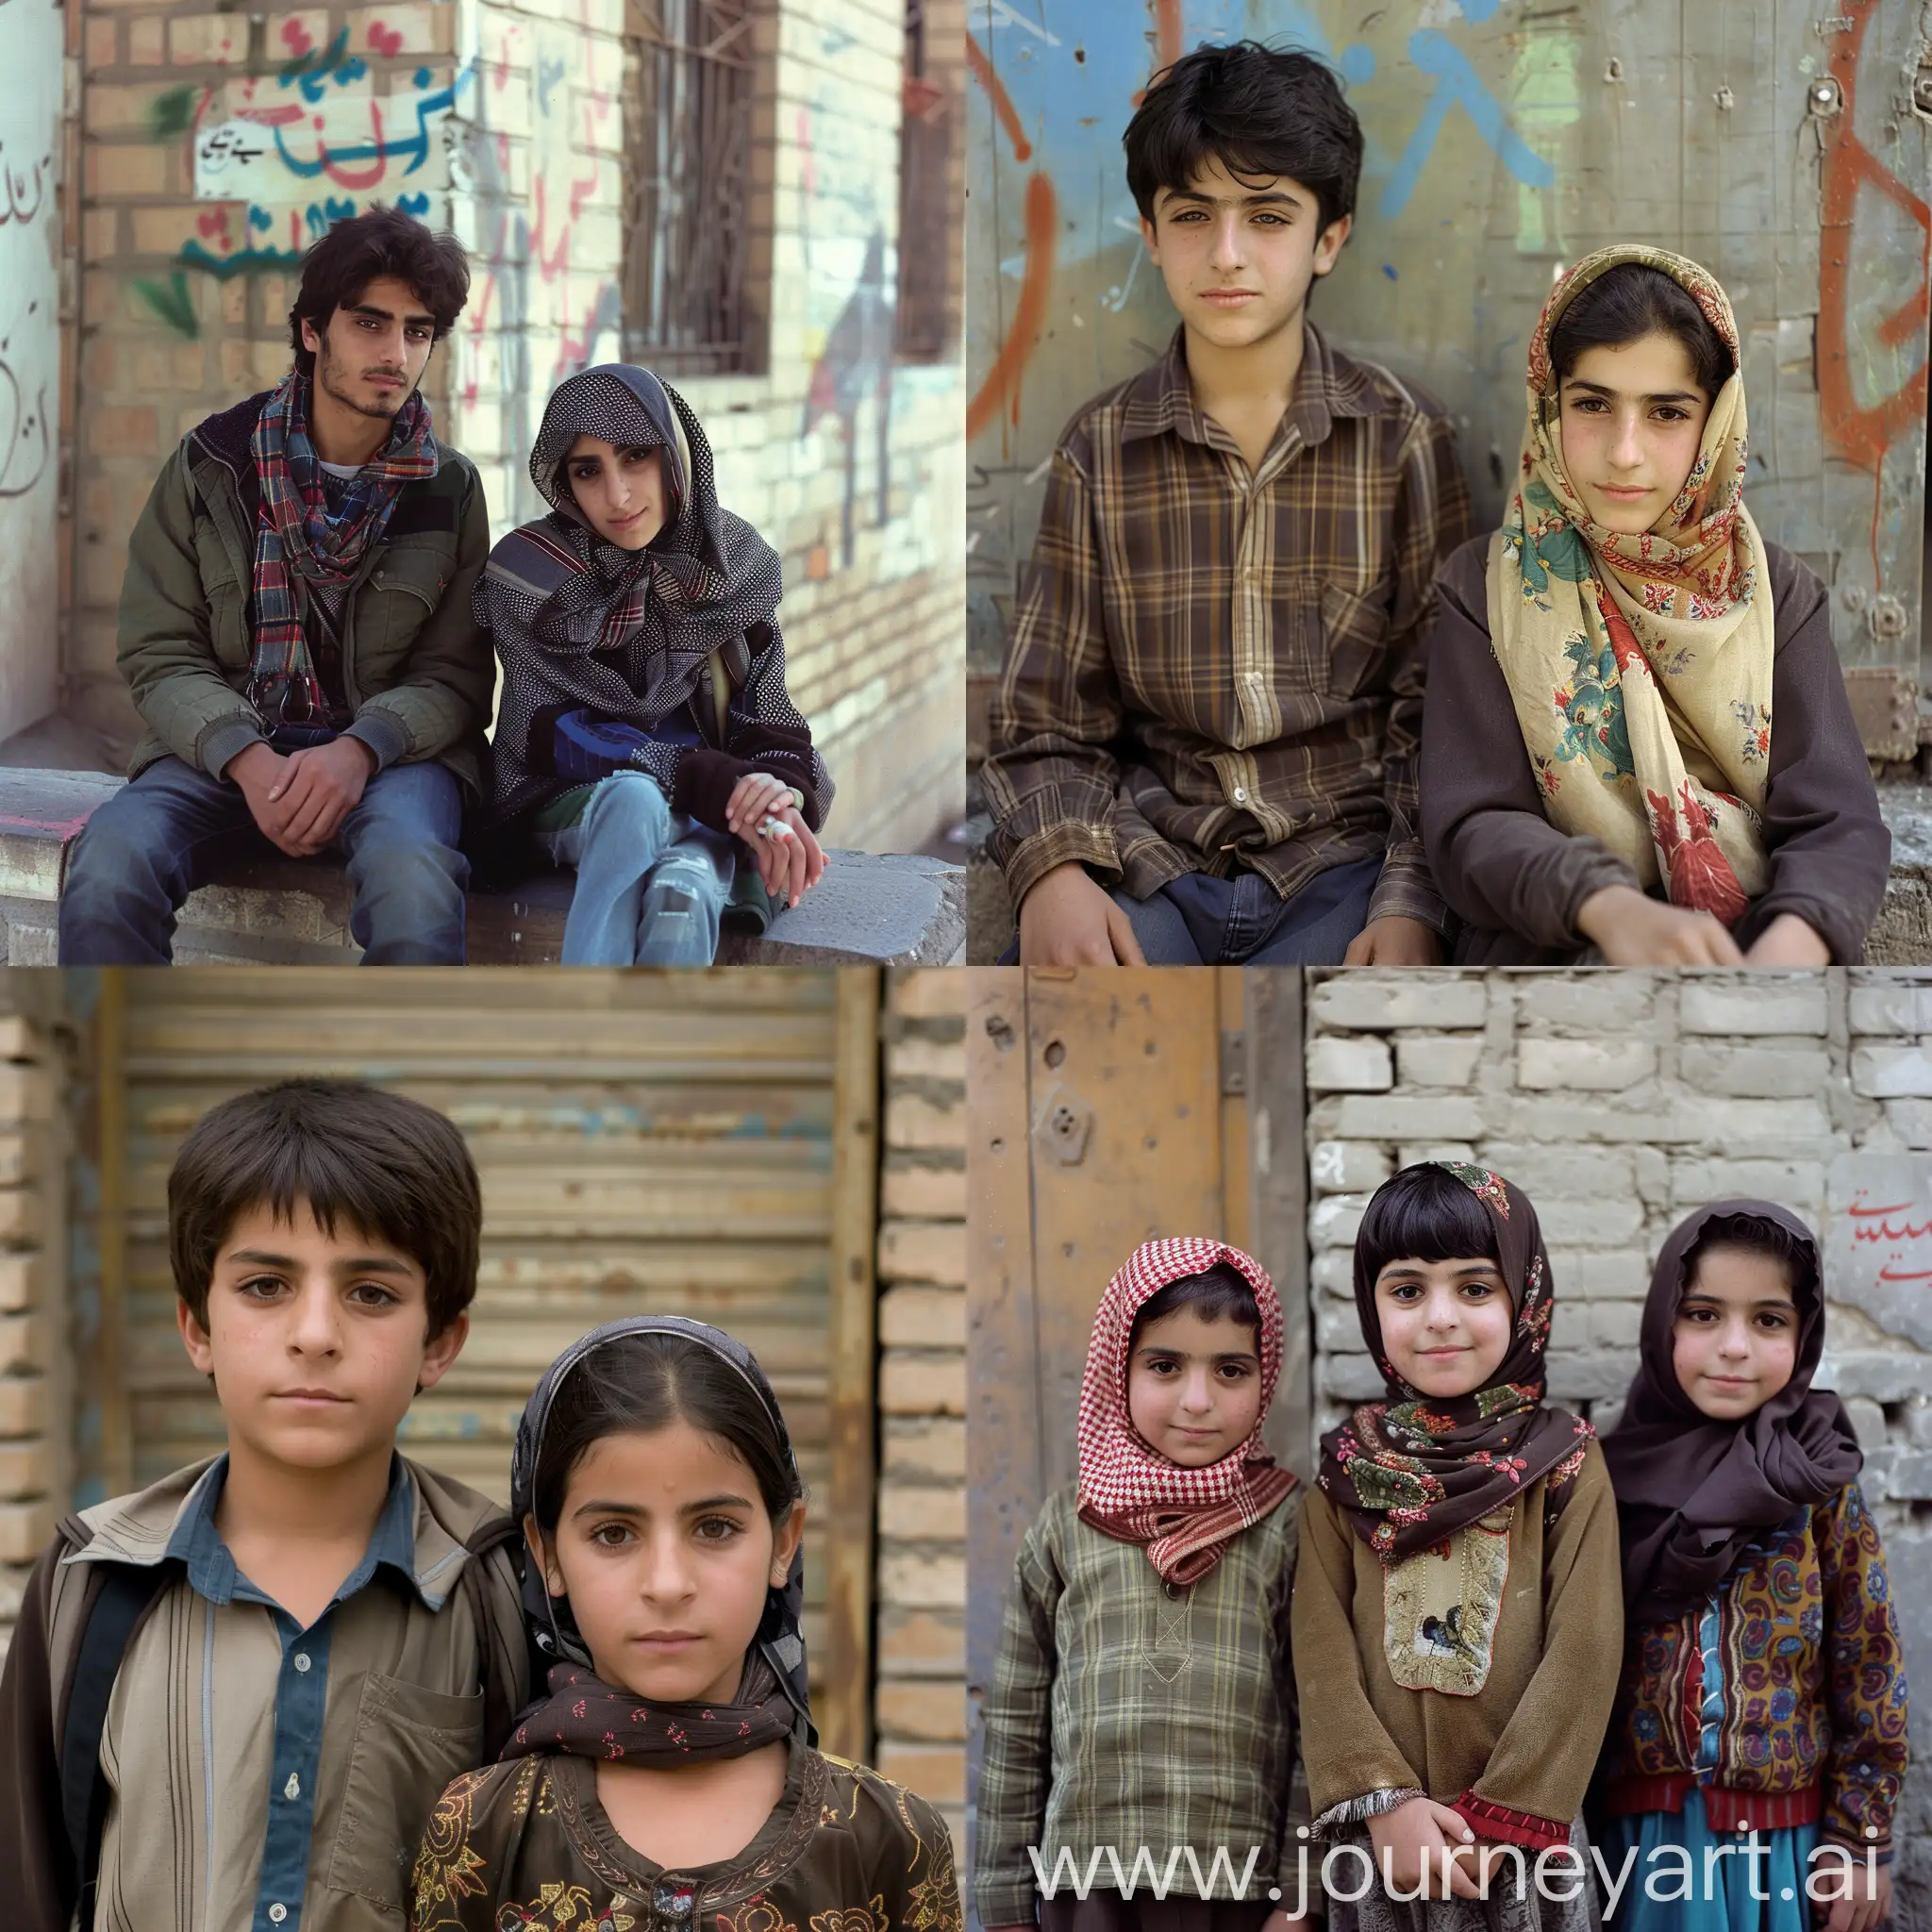 Iranian boys and girls aged 25 to 30